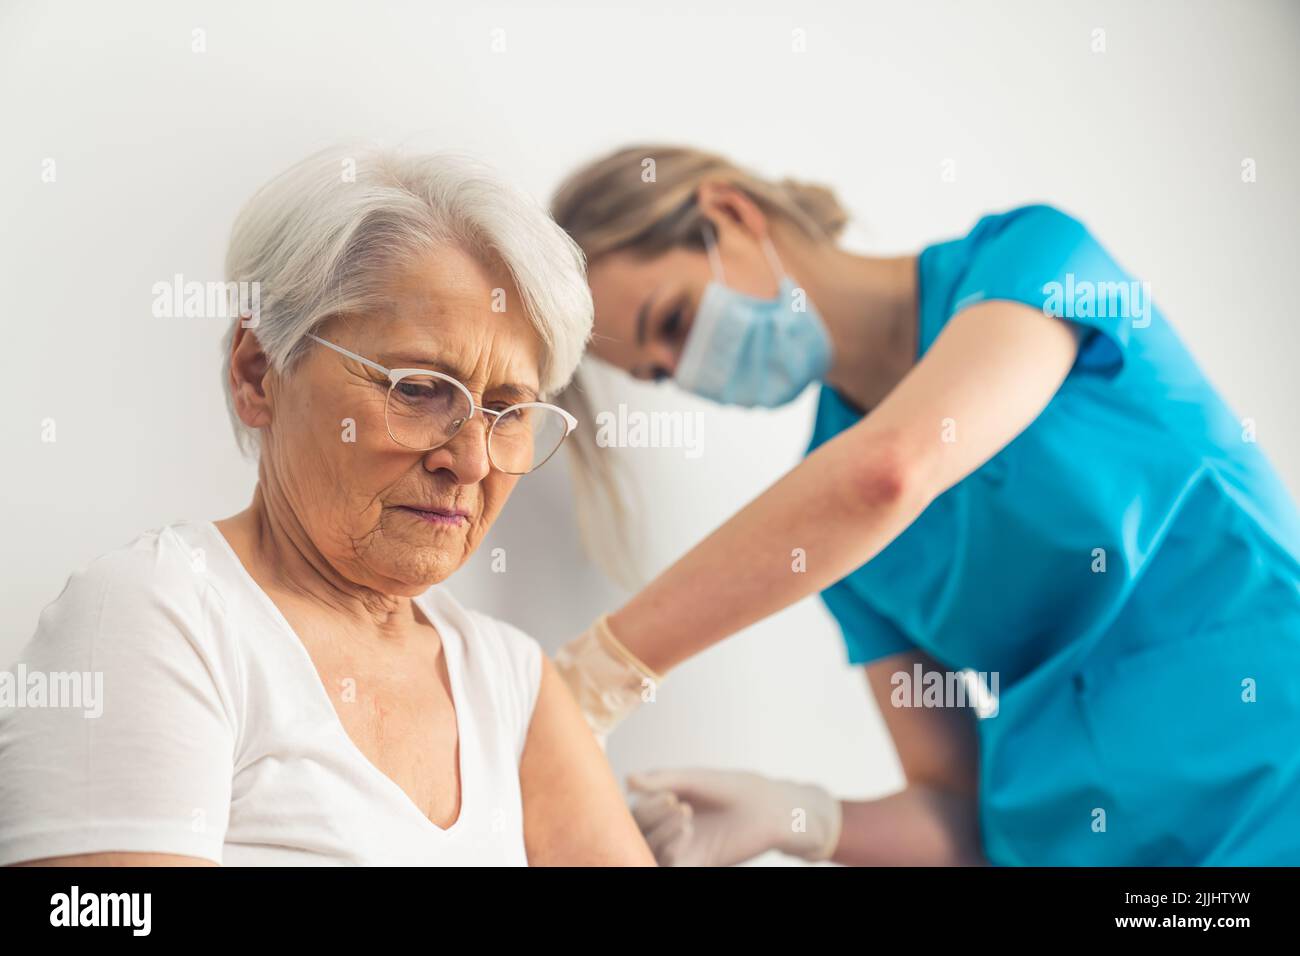 Young nurse making the injection of medication or anti-covid vaccine to a senior gray-haired woman at the hospital. High quality photo Stock Photo